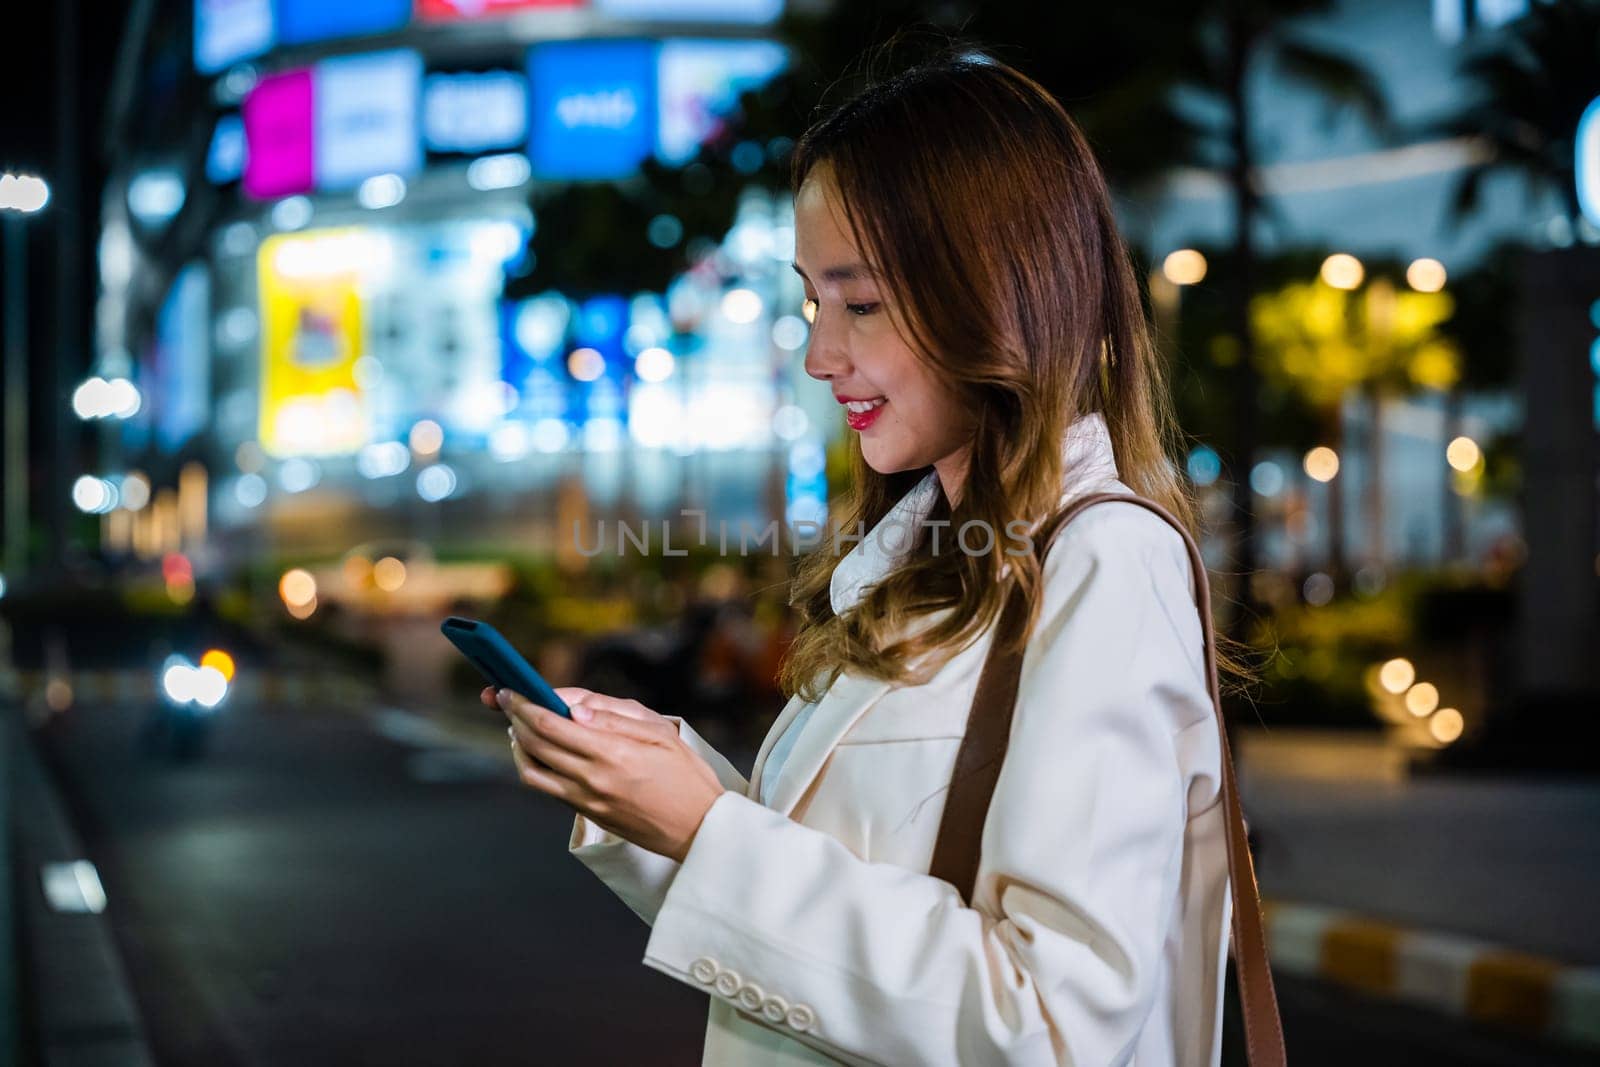 A portrait of a woman standing on the street at night, holding her smartphone and waiting for a ride.